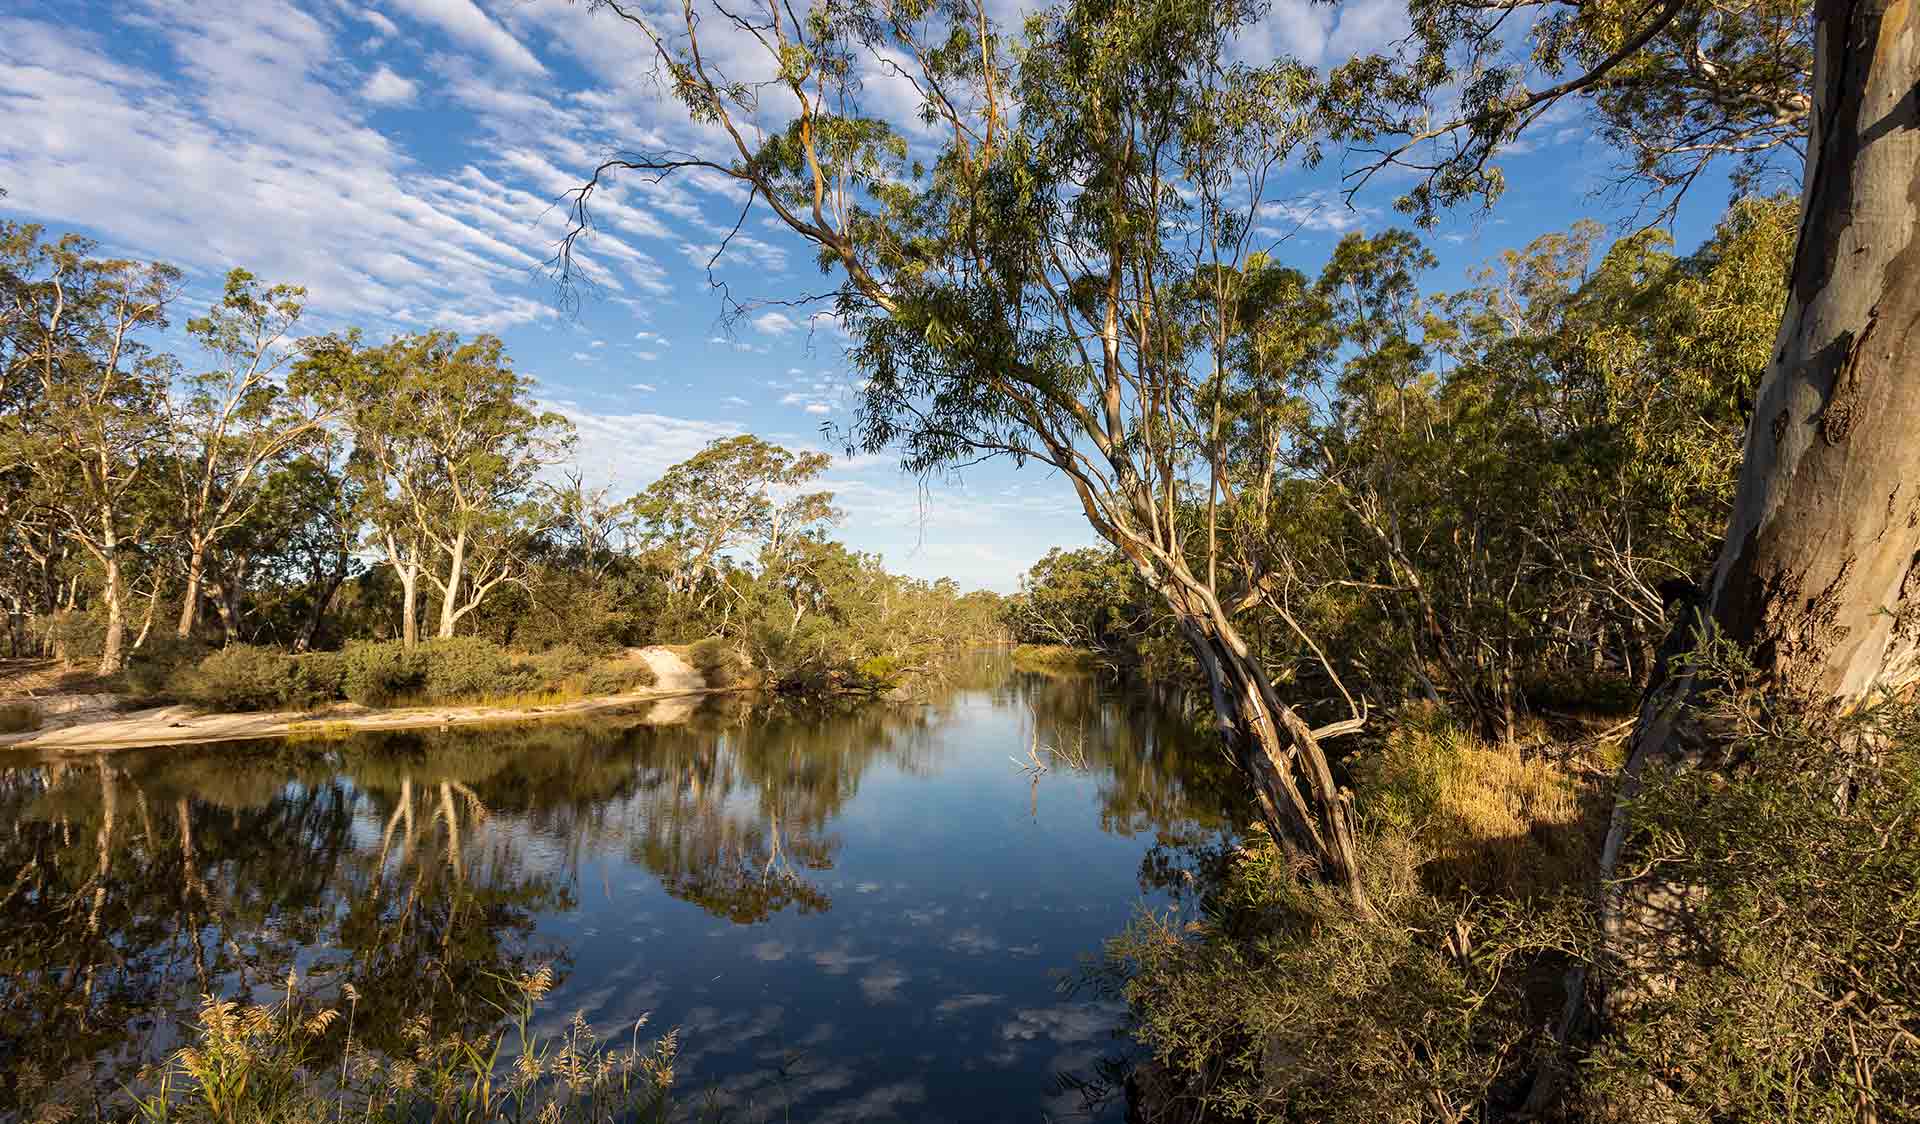 The Wimmera River near Ackle Bend Campground in Little Desert National Park